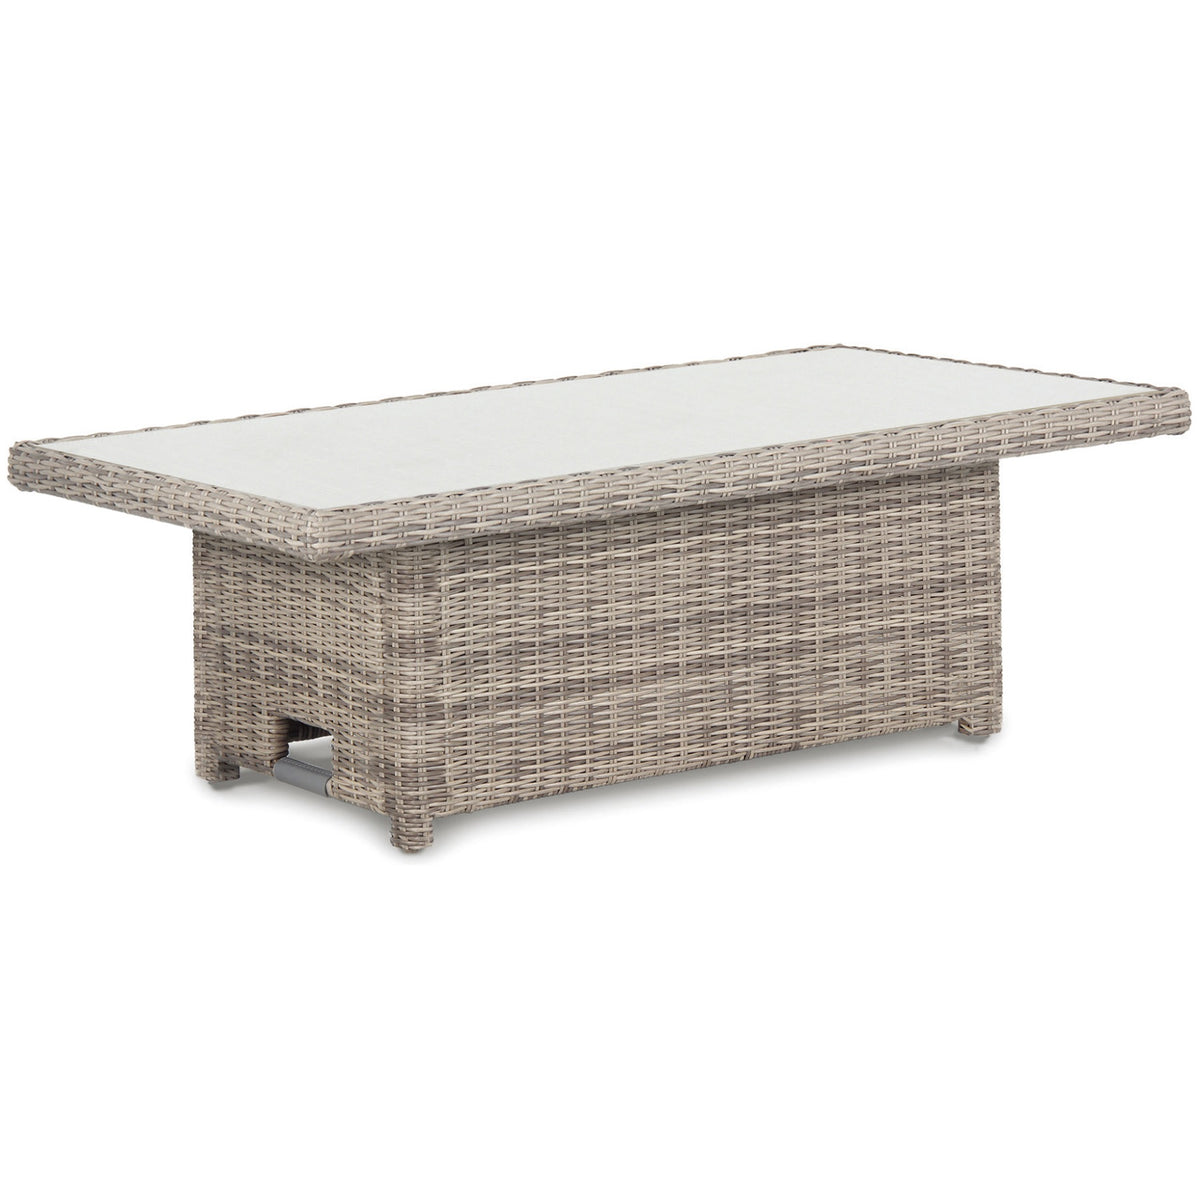 Kettler Palma Signature Oyster Wicker High Low Adjustable Glass Top Table